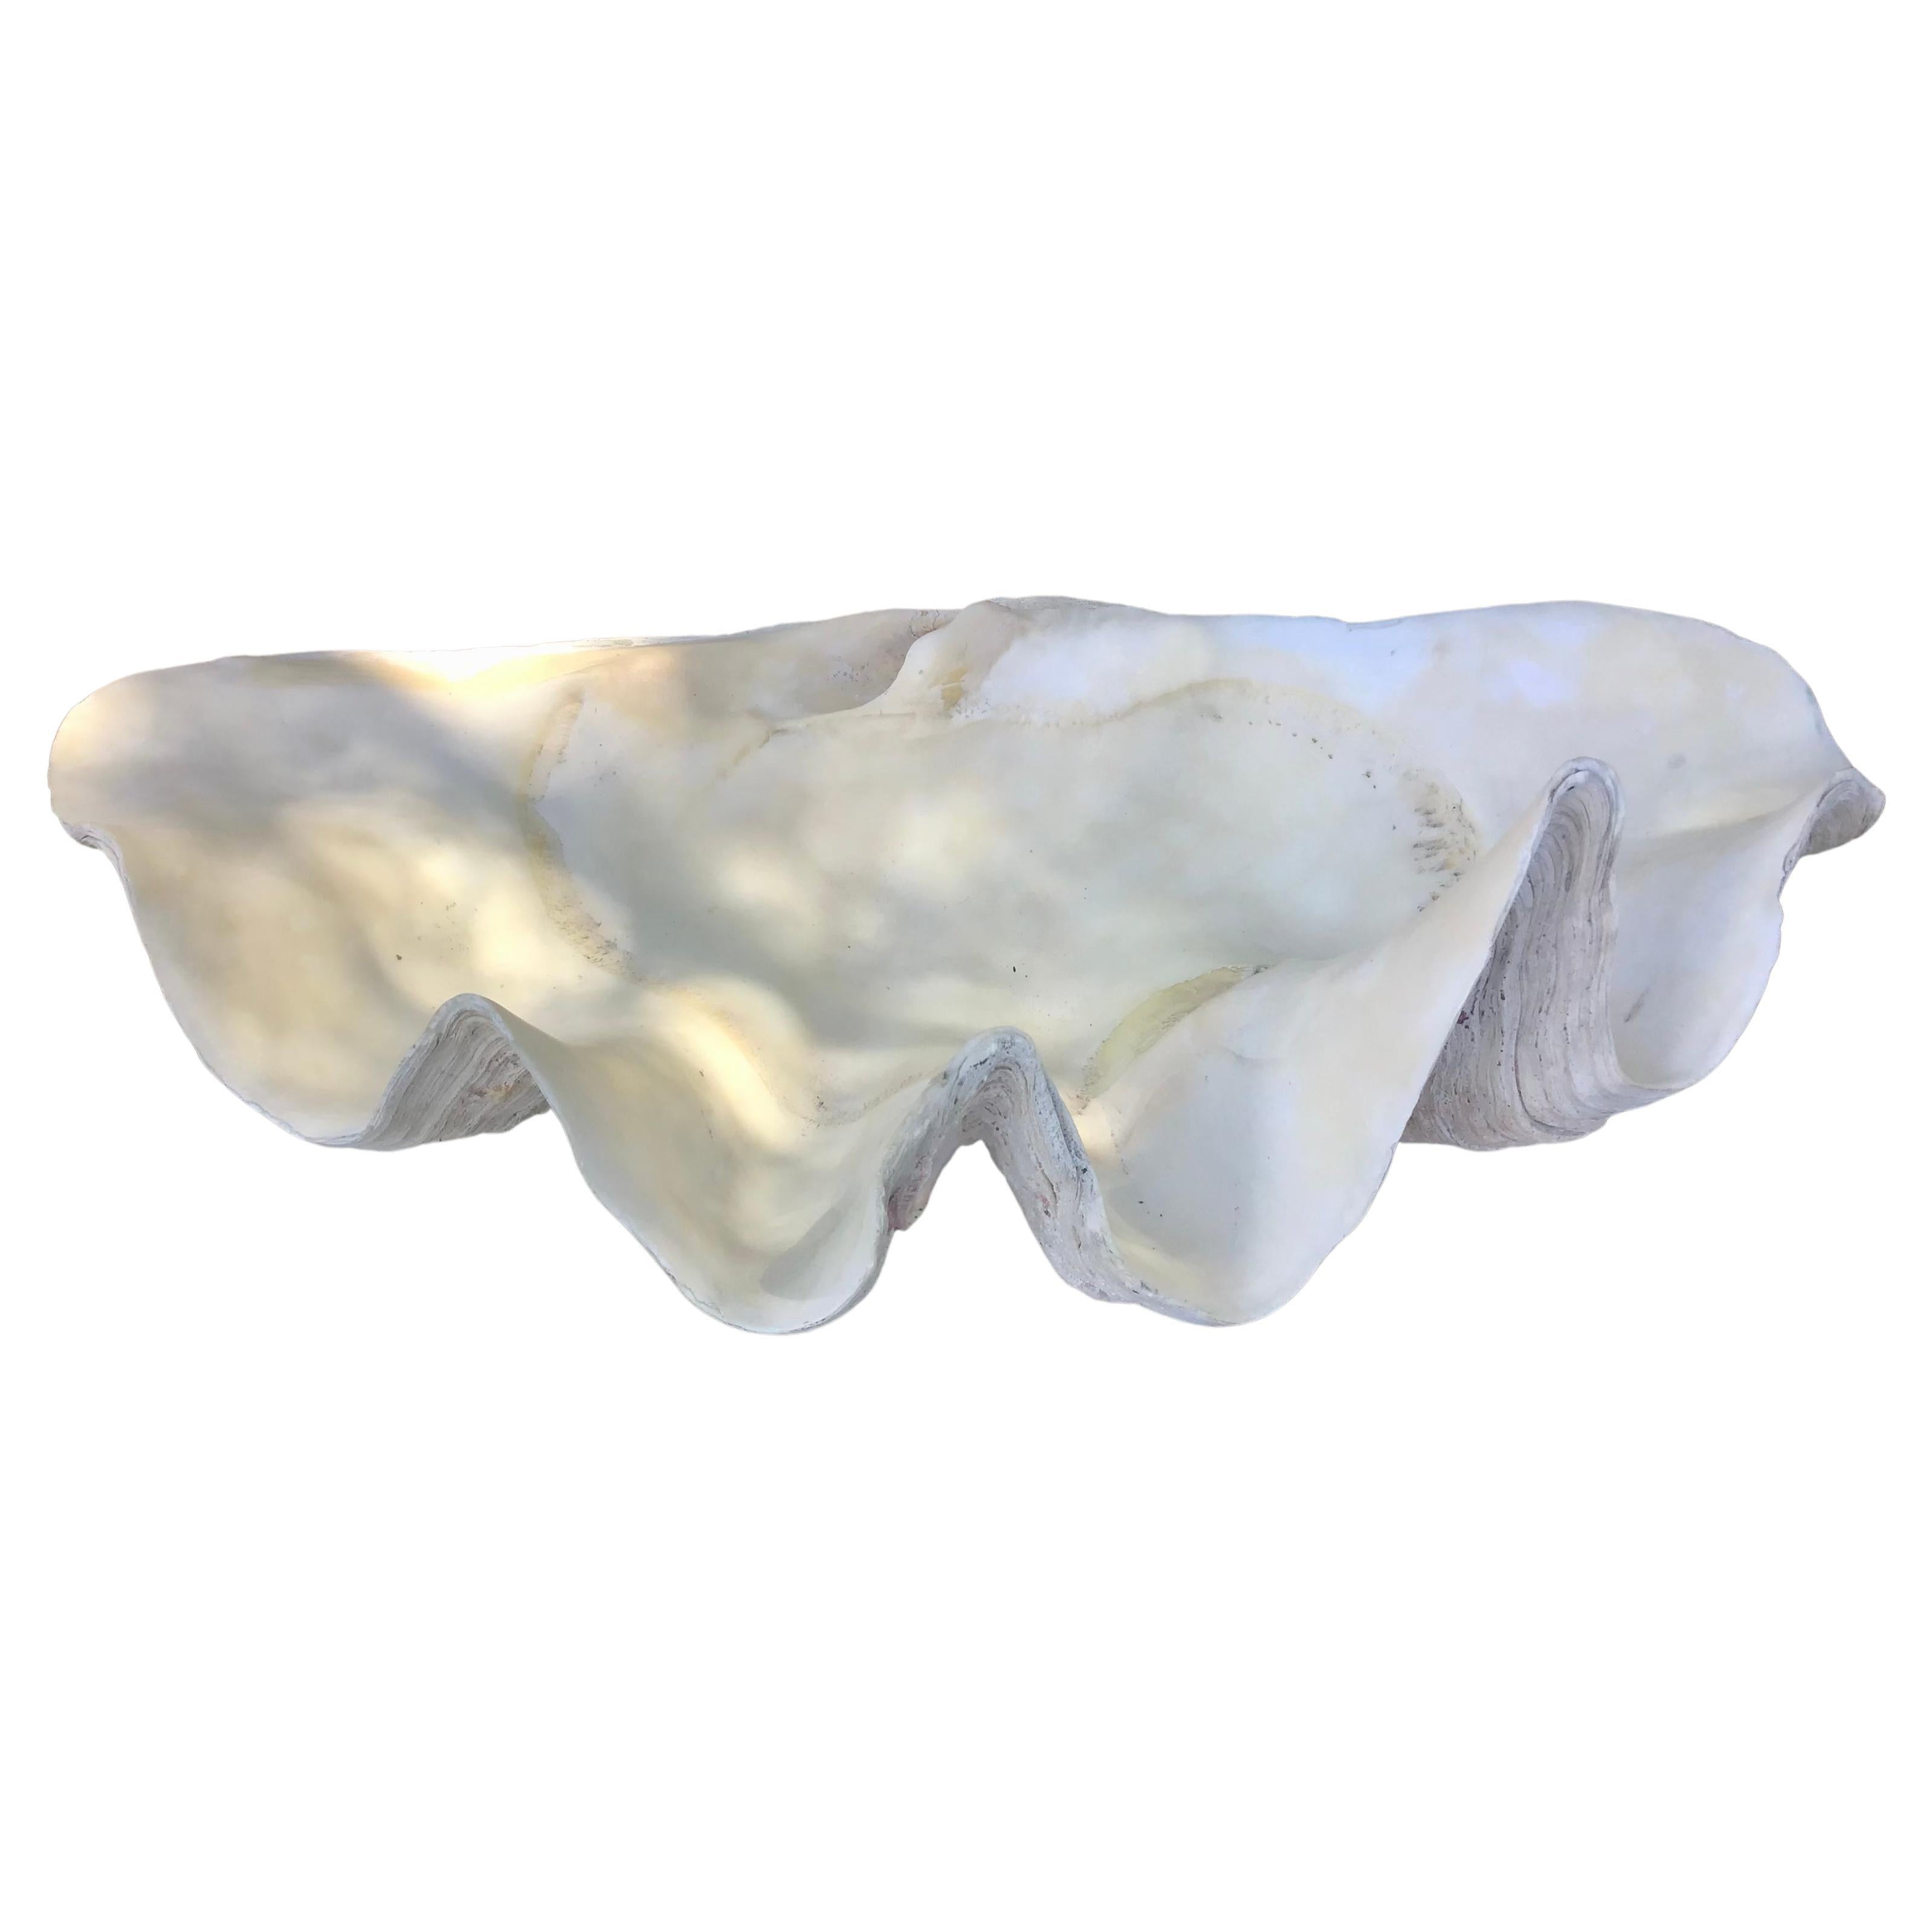  Natural Giant Clam Shell